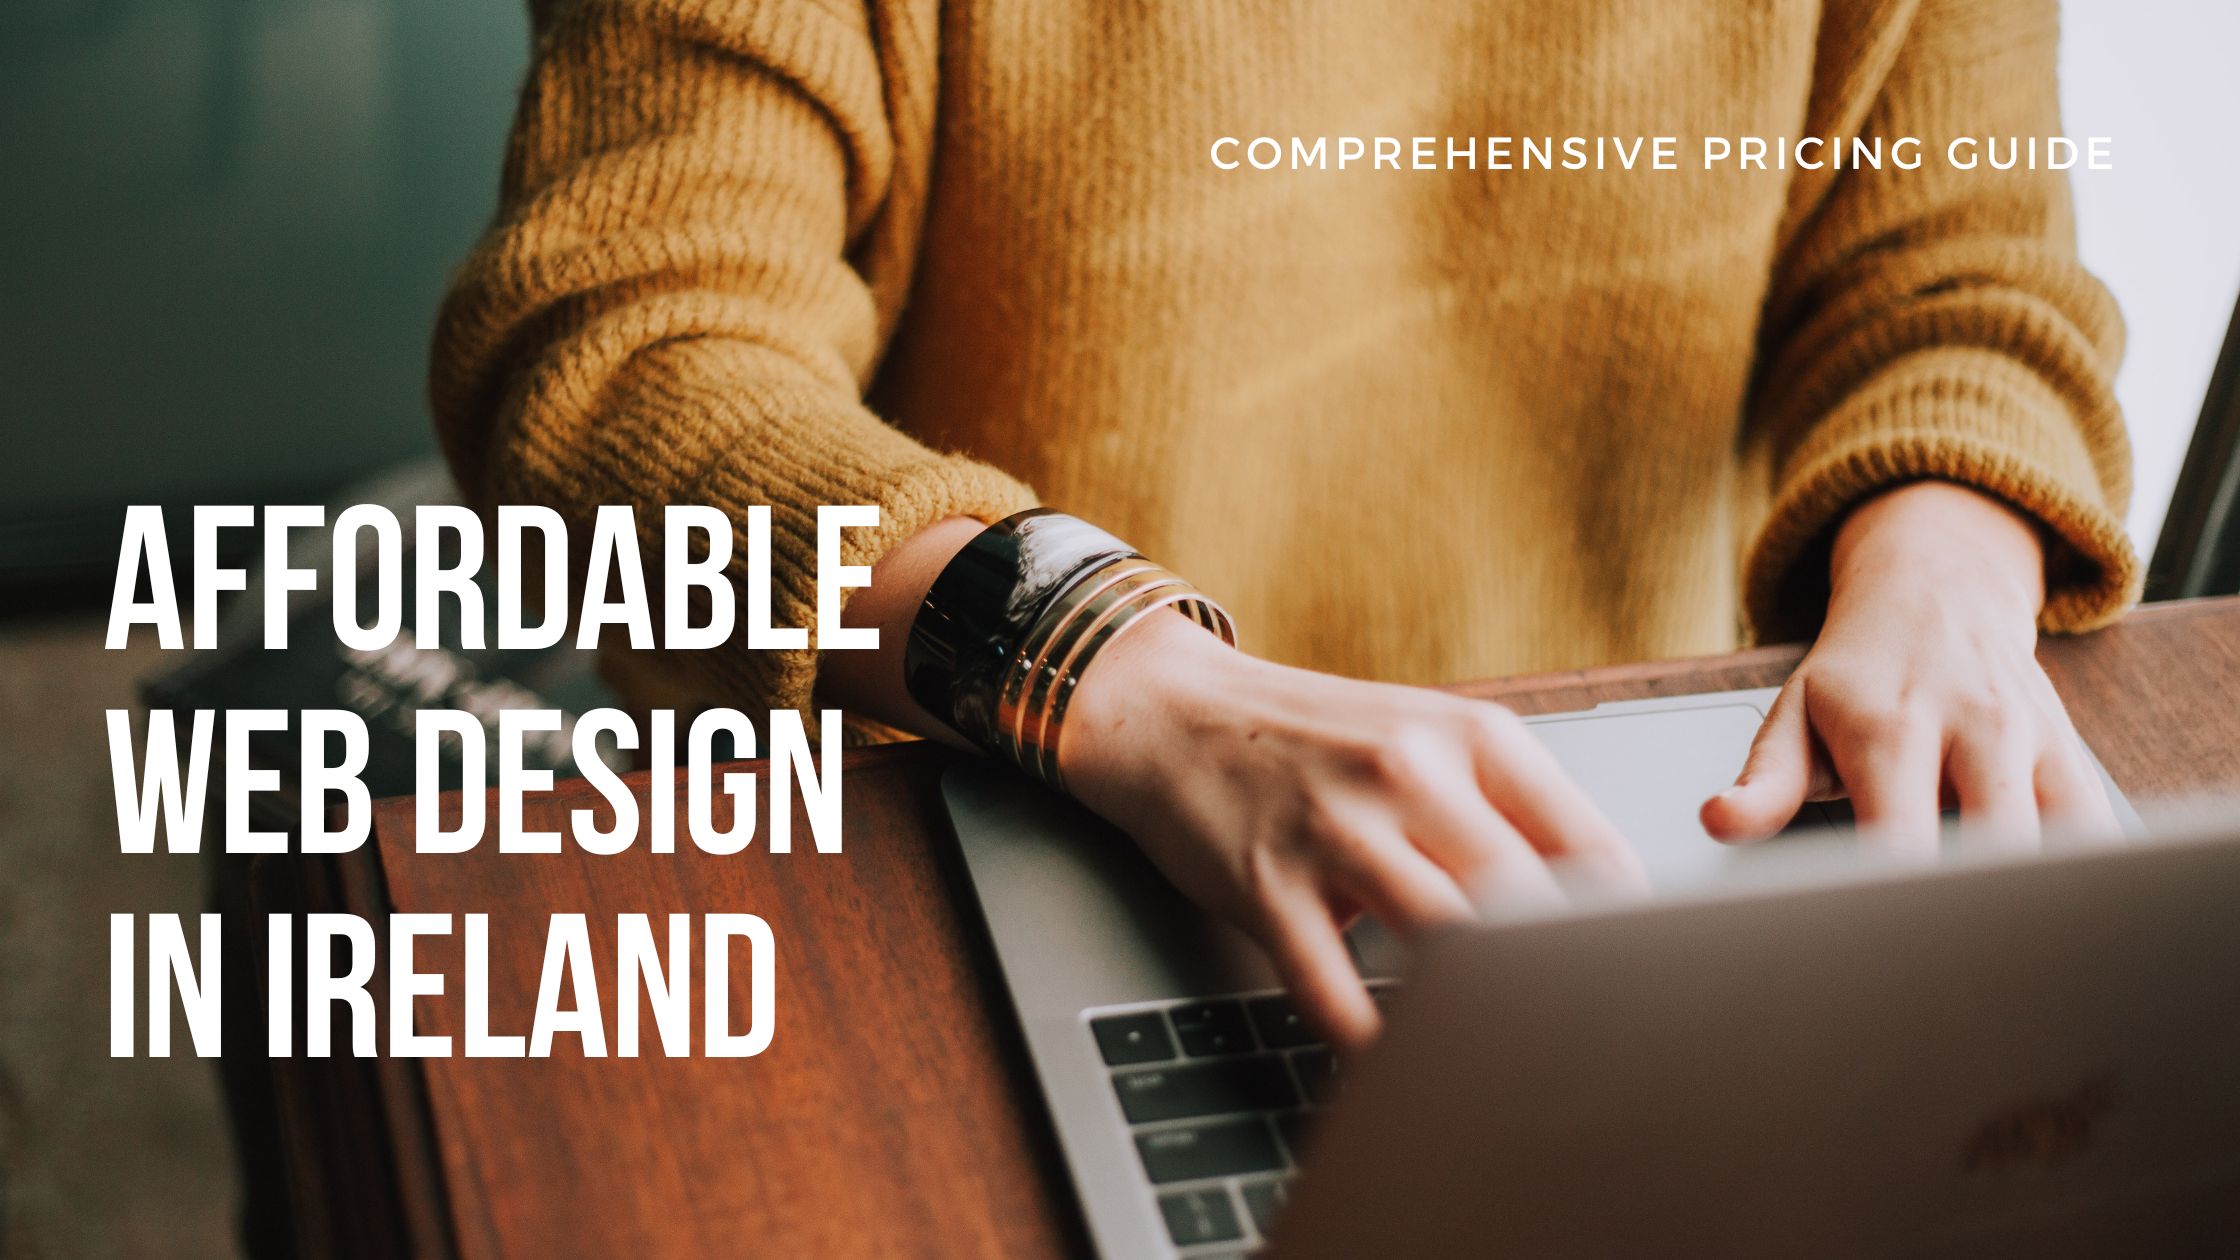 Affordable Web Design in Ireland: A Comprehensive Pricing Guide